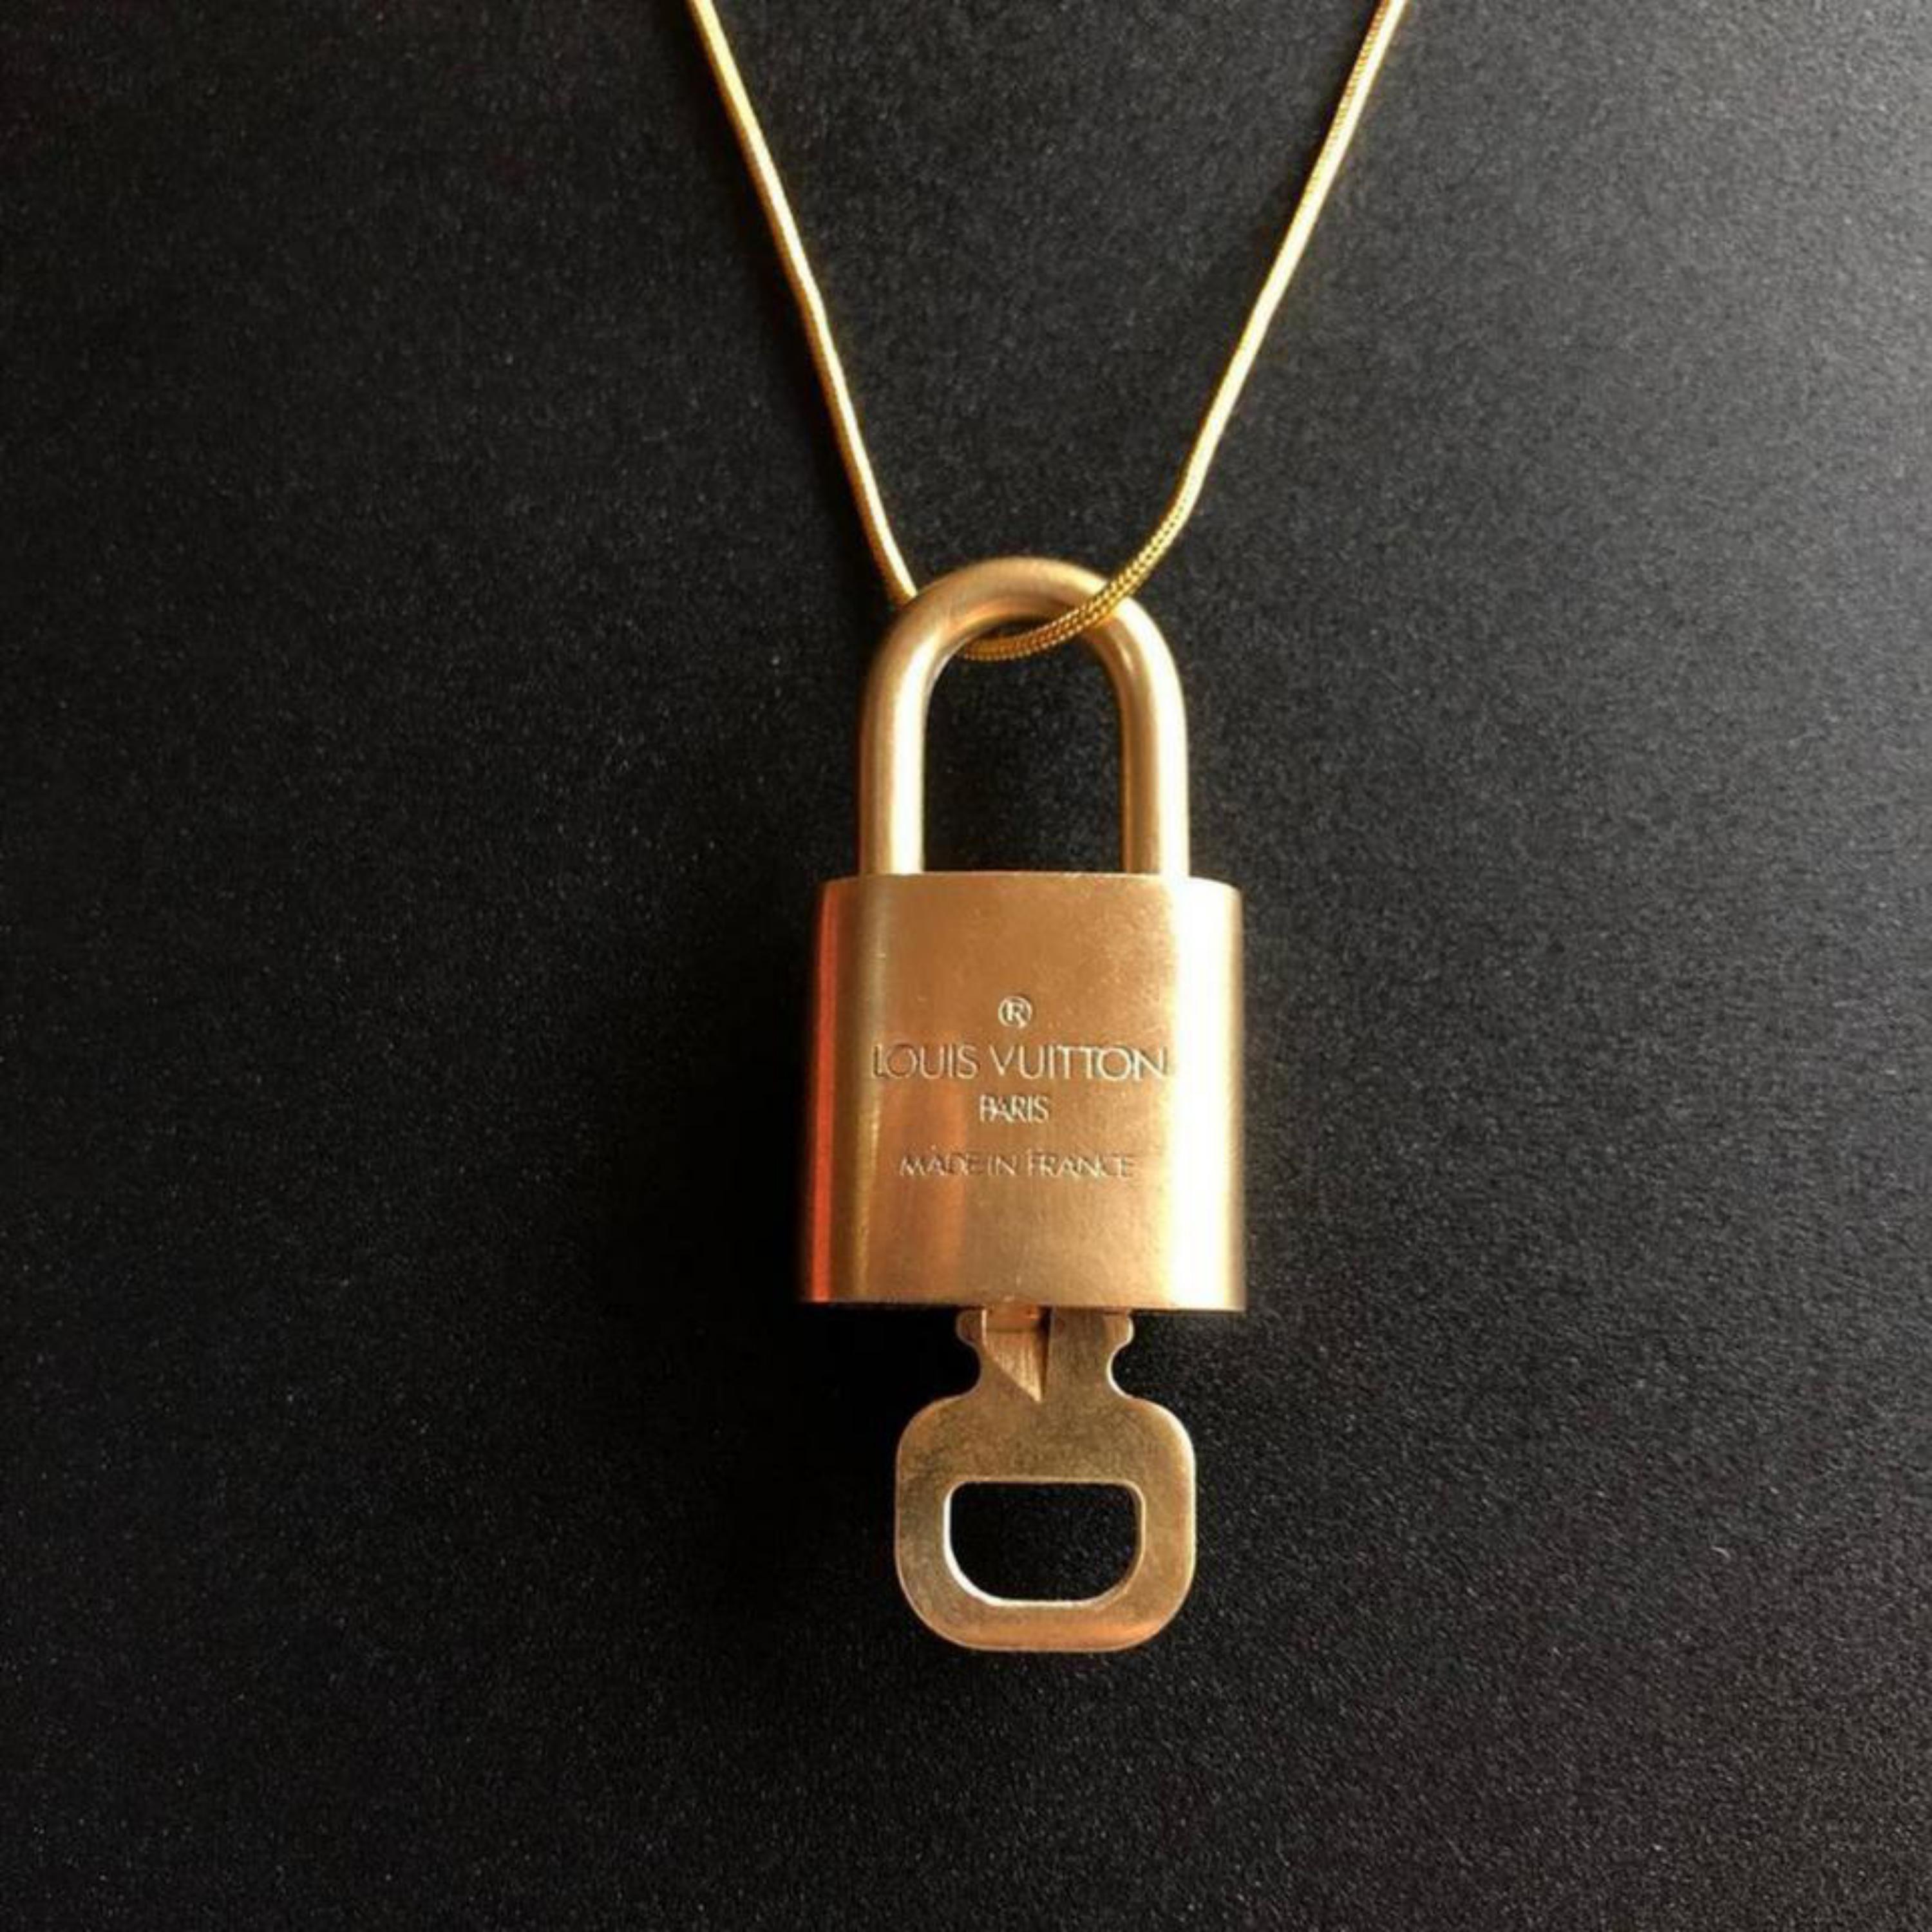 Louis Vuitton Gold Gold Single Key Lock Pad Lock and Key 867741 For Sale 8